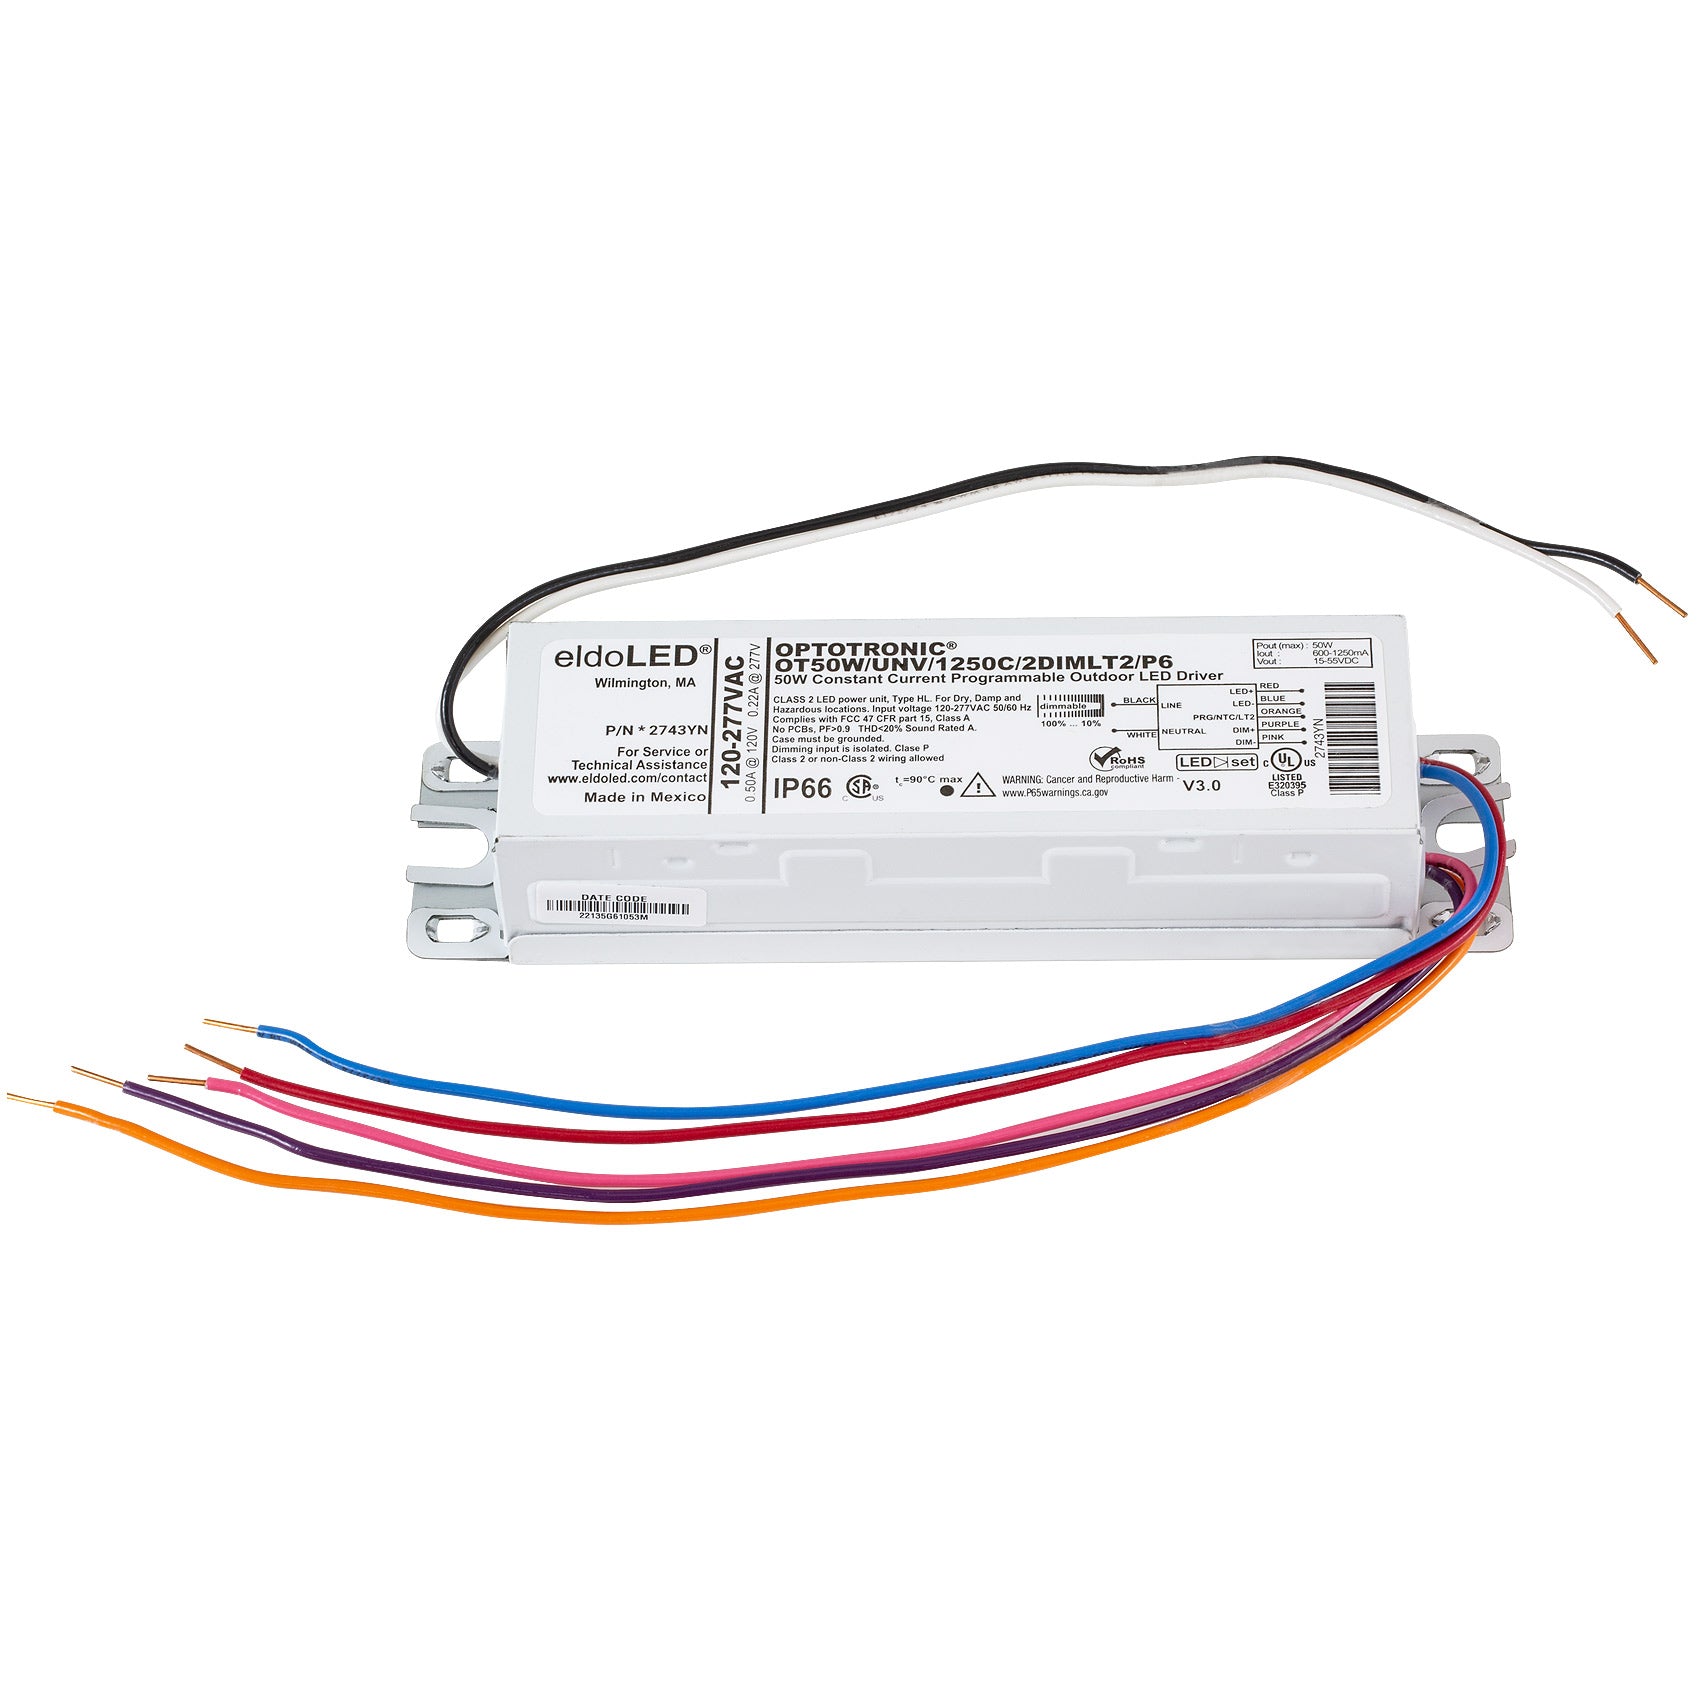 eldoLED *2743YN OPTOTRONIC 50W Constant Current 0-10V Dimmable LED Driver,  Programmable Outdoor OT50W/UNV/1250C/2DIMLT2/P6 (Osram 79371)